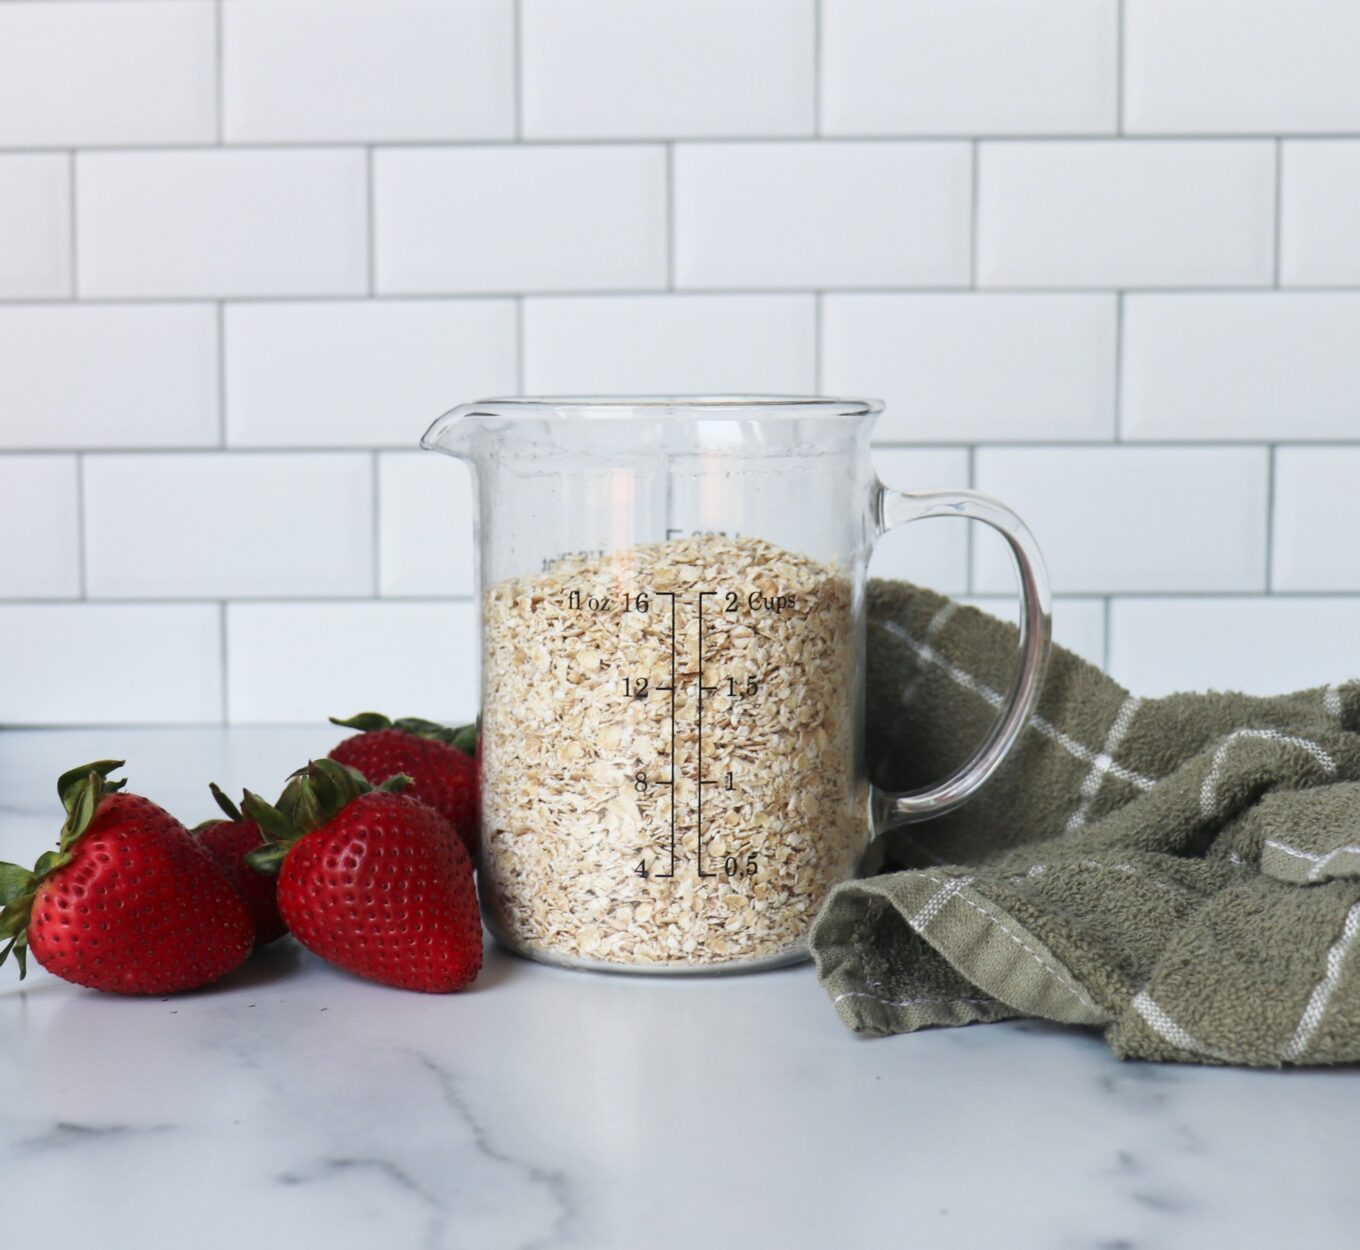 fruity overnight oats on a kitchen counter by Christine Tizzard